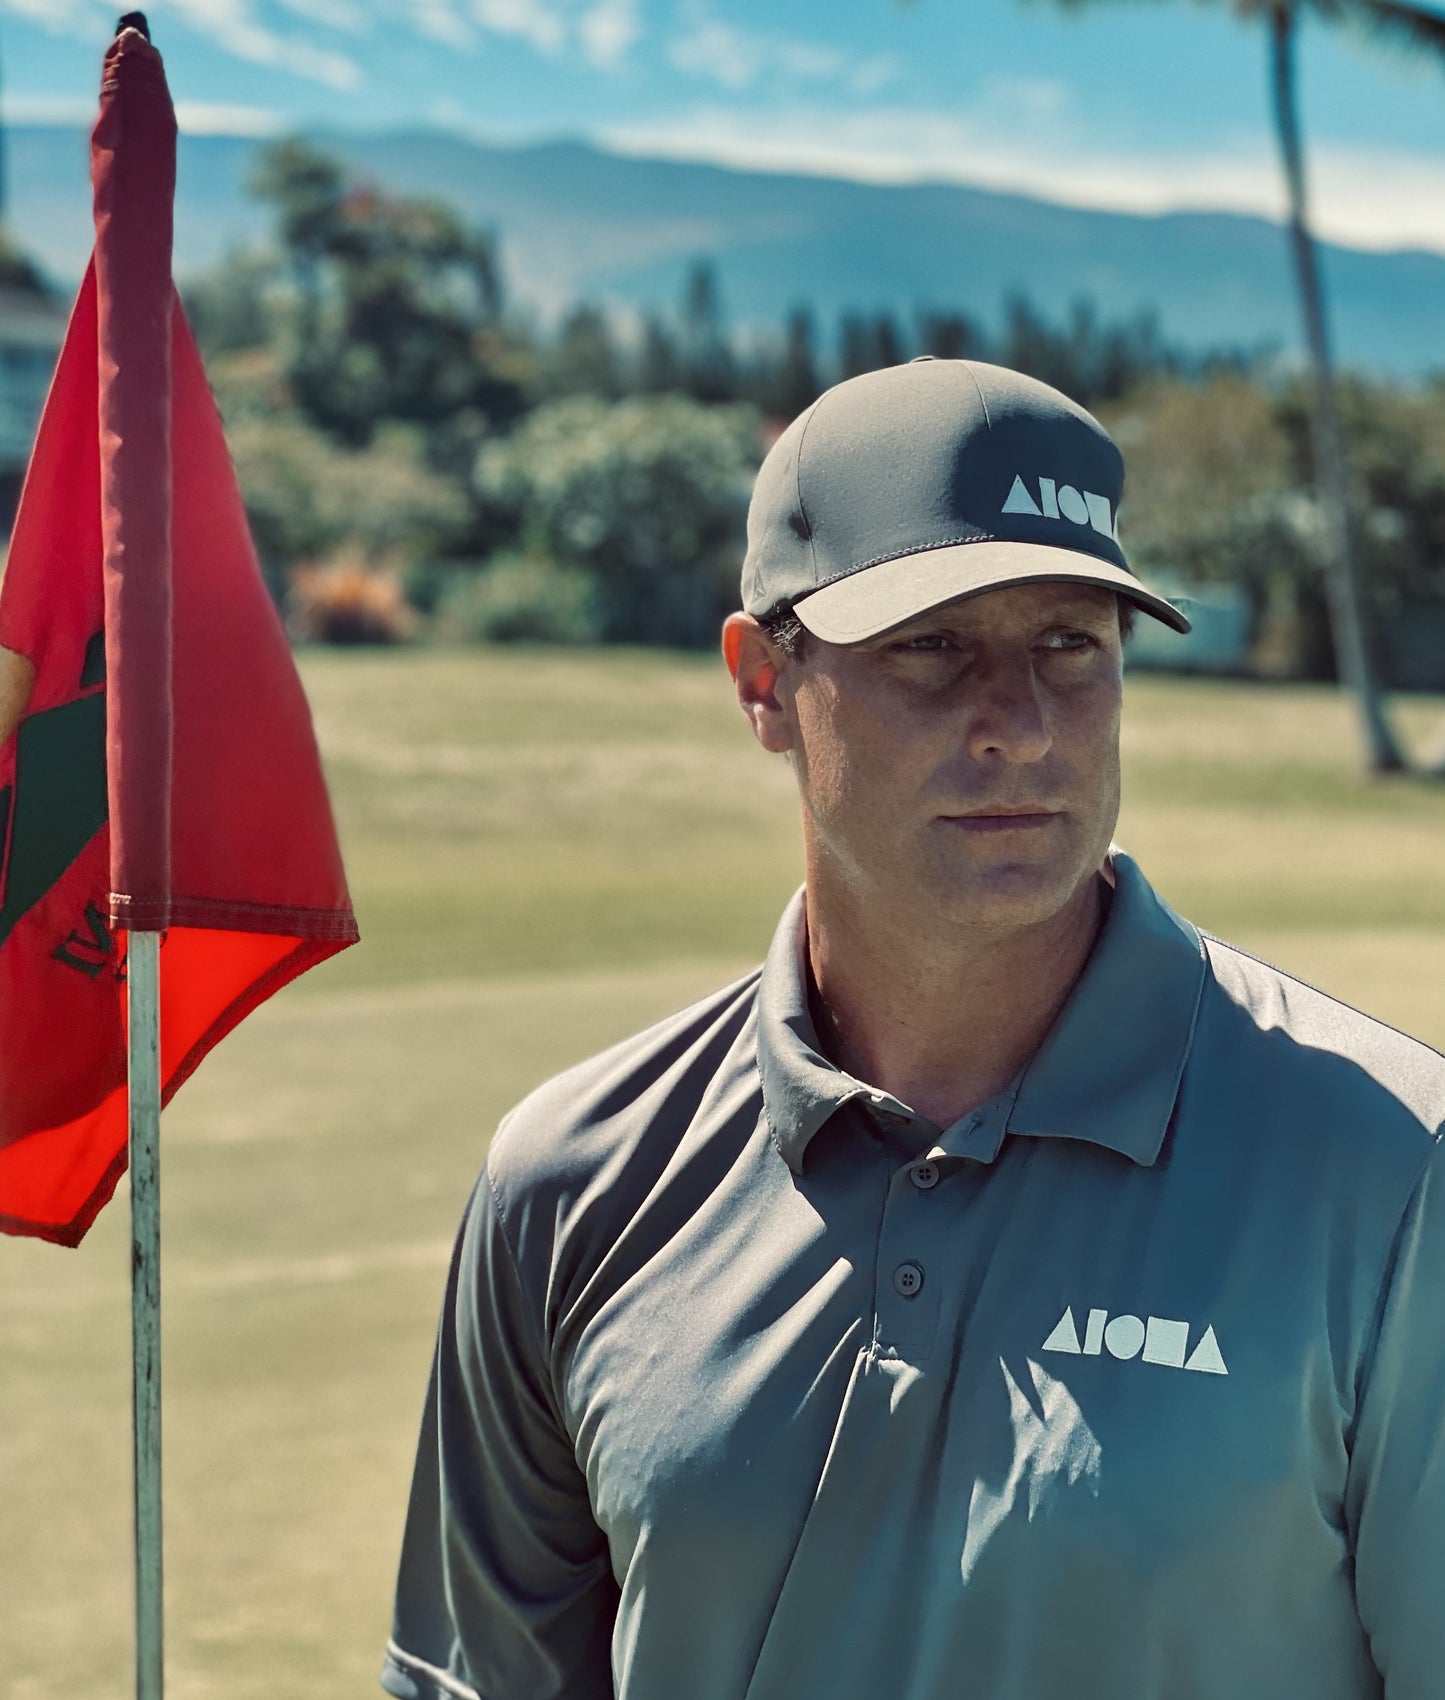 Person standing by a golf flag on the green wearing an embroidered Aloha Shapes® collared polo shirt and a Light grey Flexfit hat with white Aloha Shapes® logo